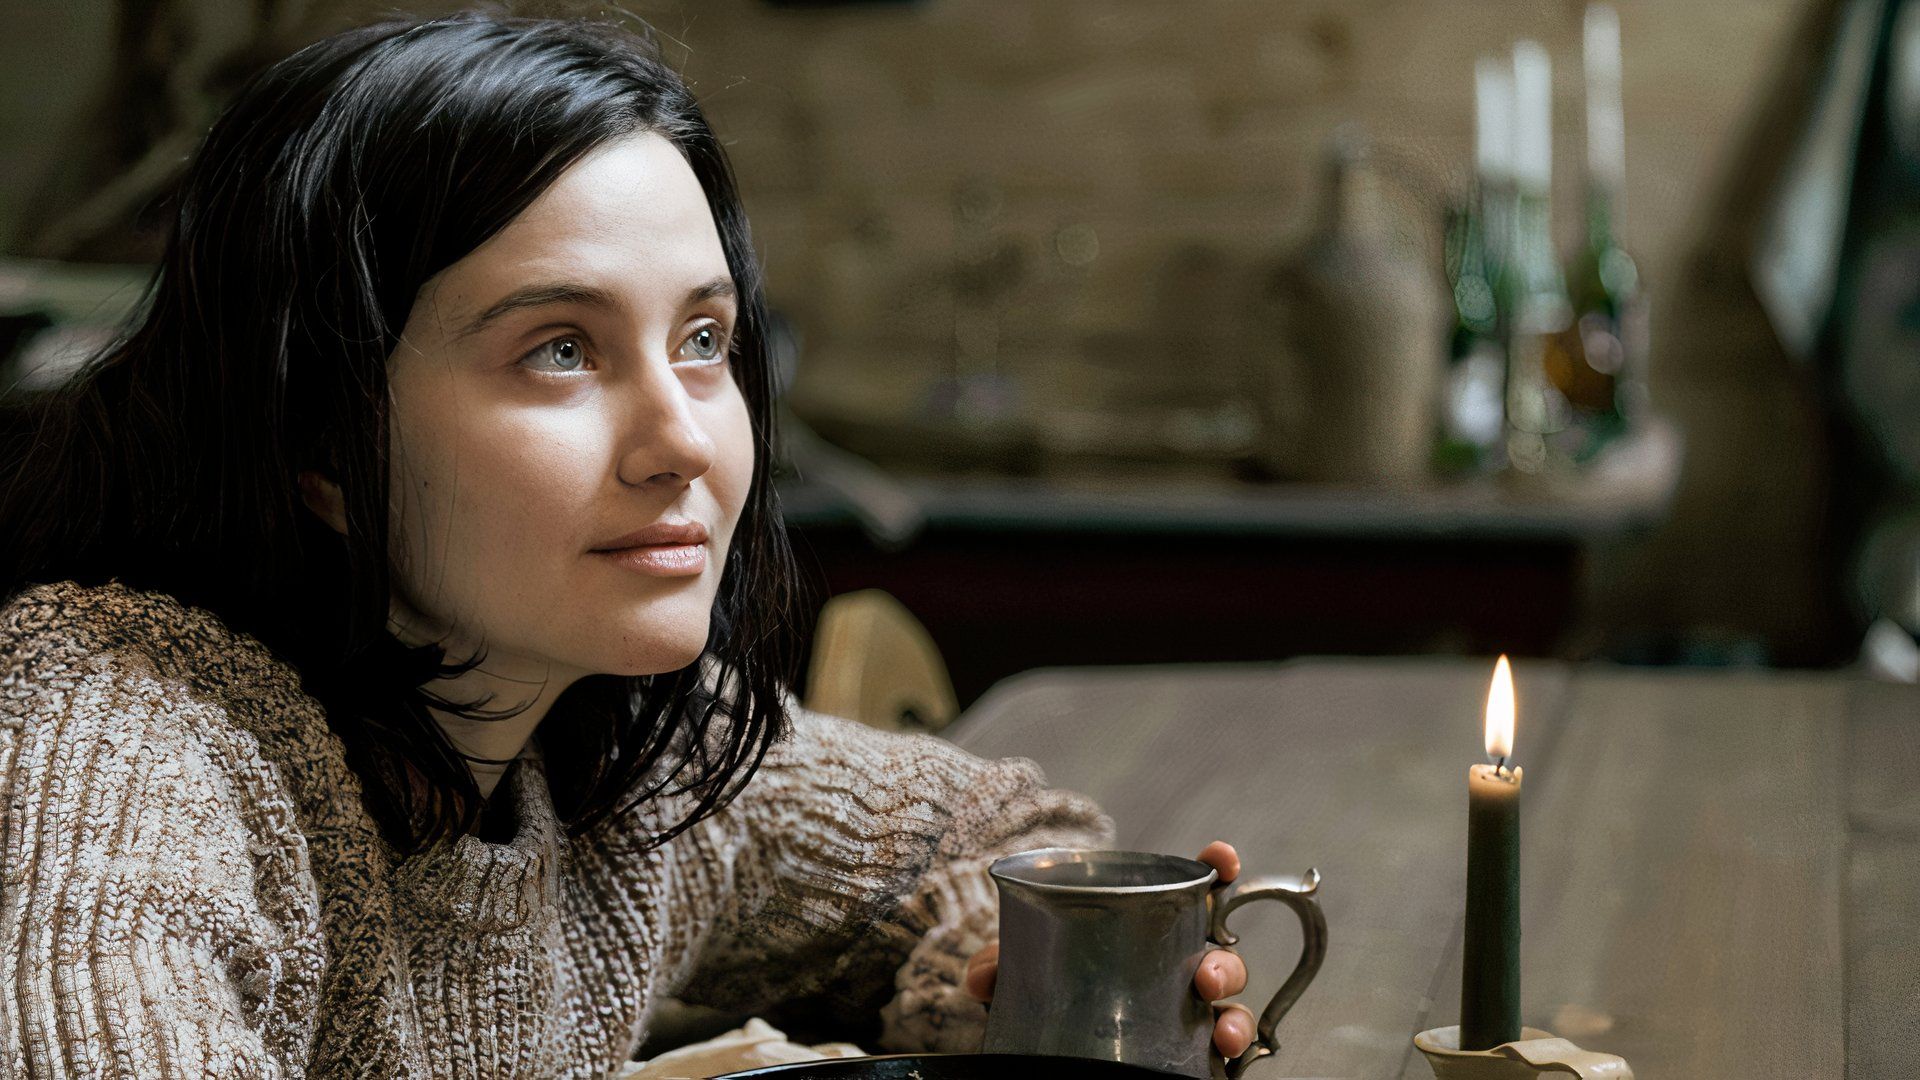 Julia Goldani Telles as Emily, sitting in a candlelit cabin and wearing a knitted sweater, in Beacon